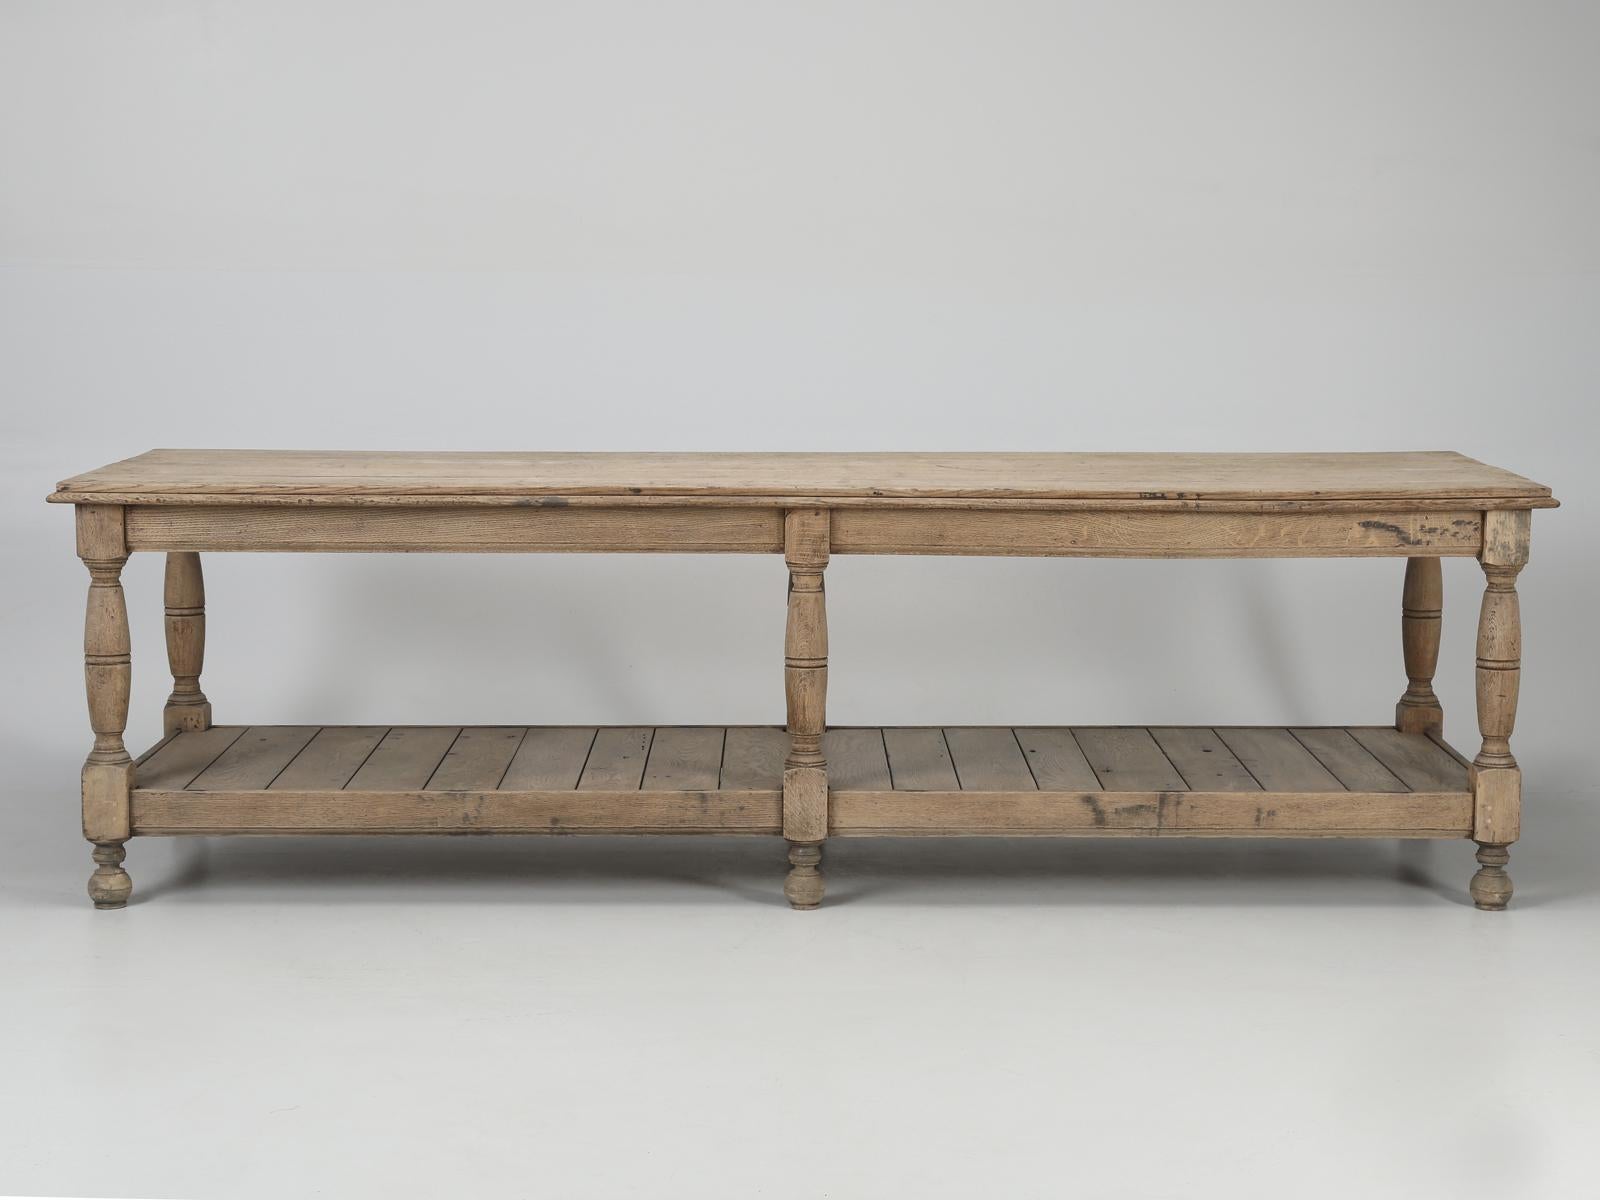 In Ireland, where we purchased this antique oak work table, it was described as an “antique oak refectory table, four plank top on six turned legs”. In France you might have called this industrial style table, a “draper’s table”, while in England,